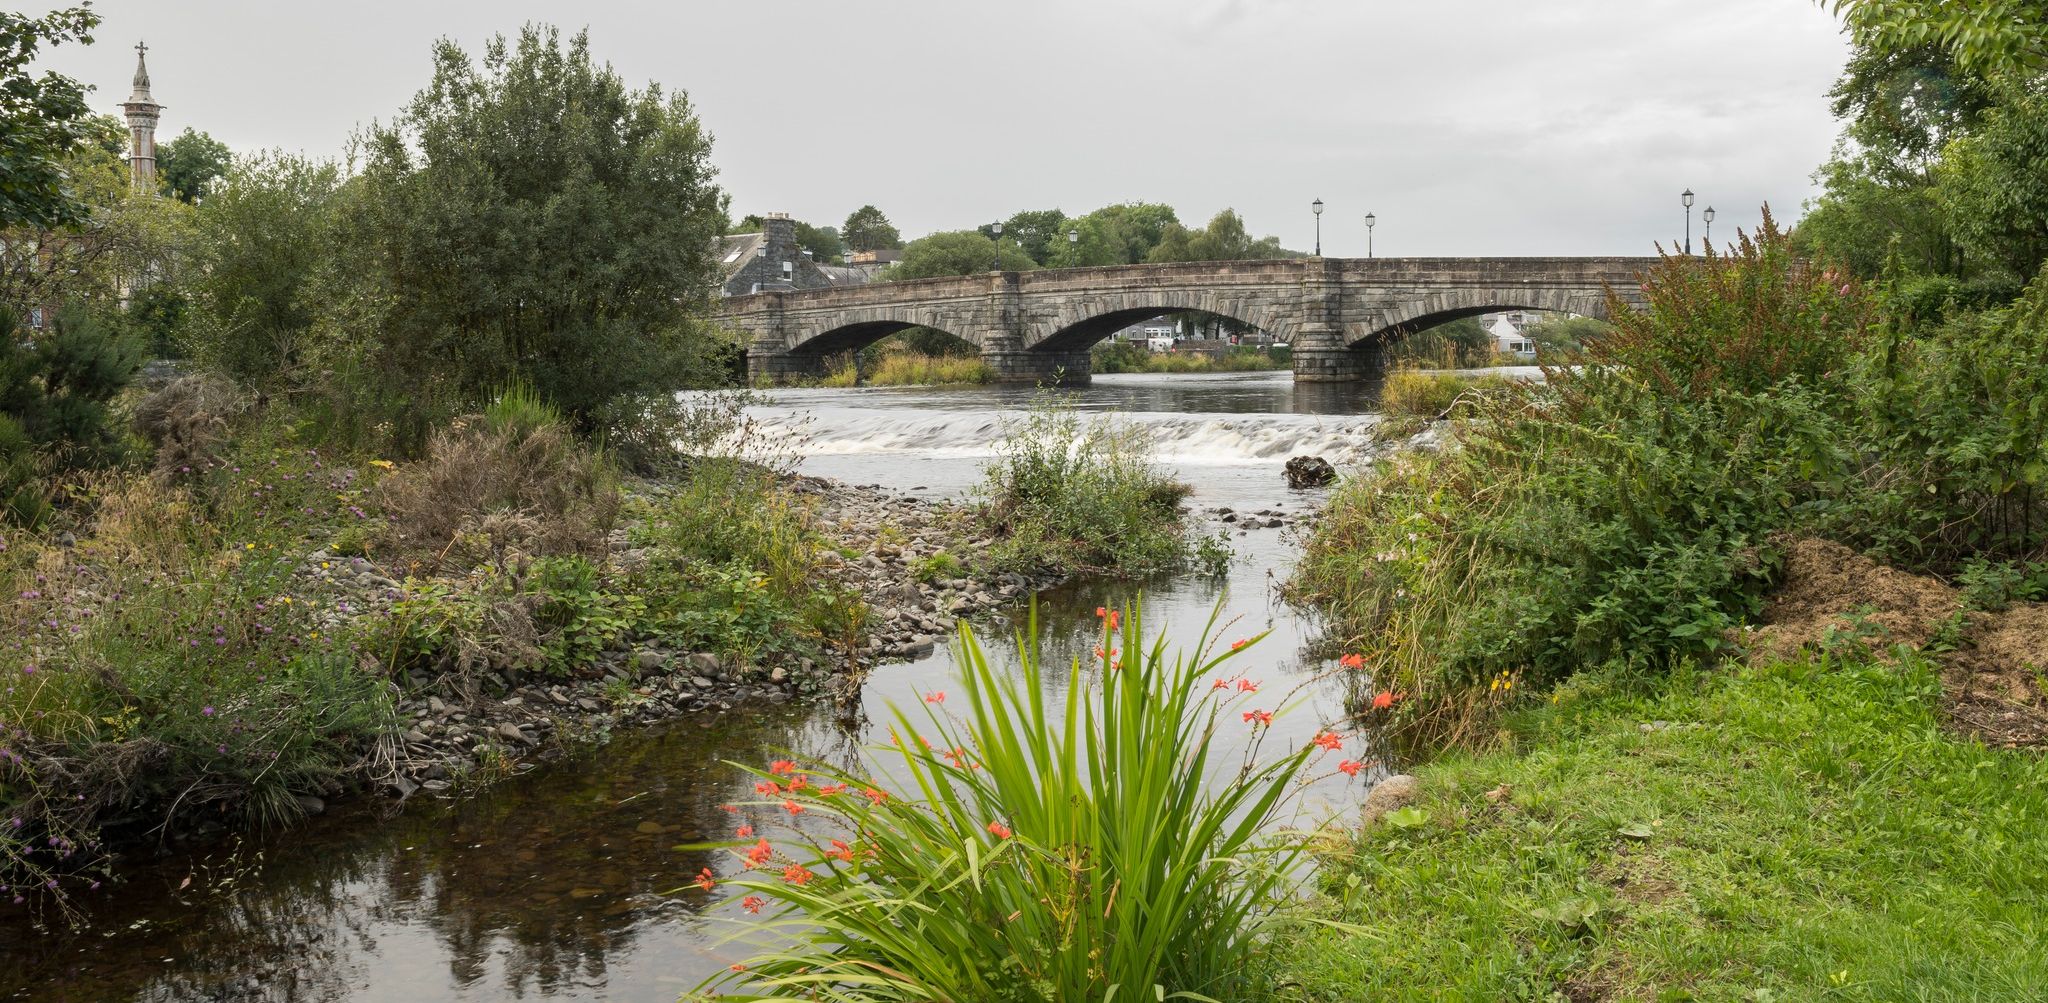 The Bridge over the River Cree in Newton Stewart